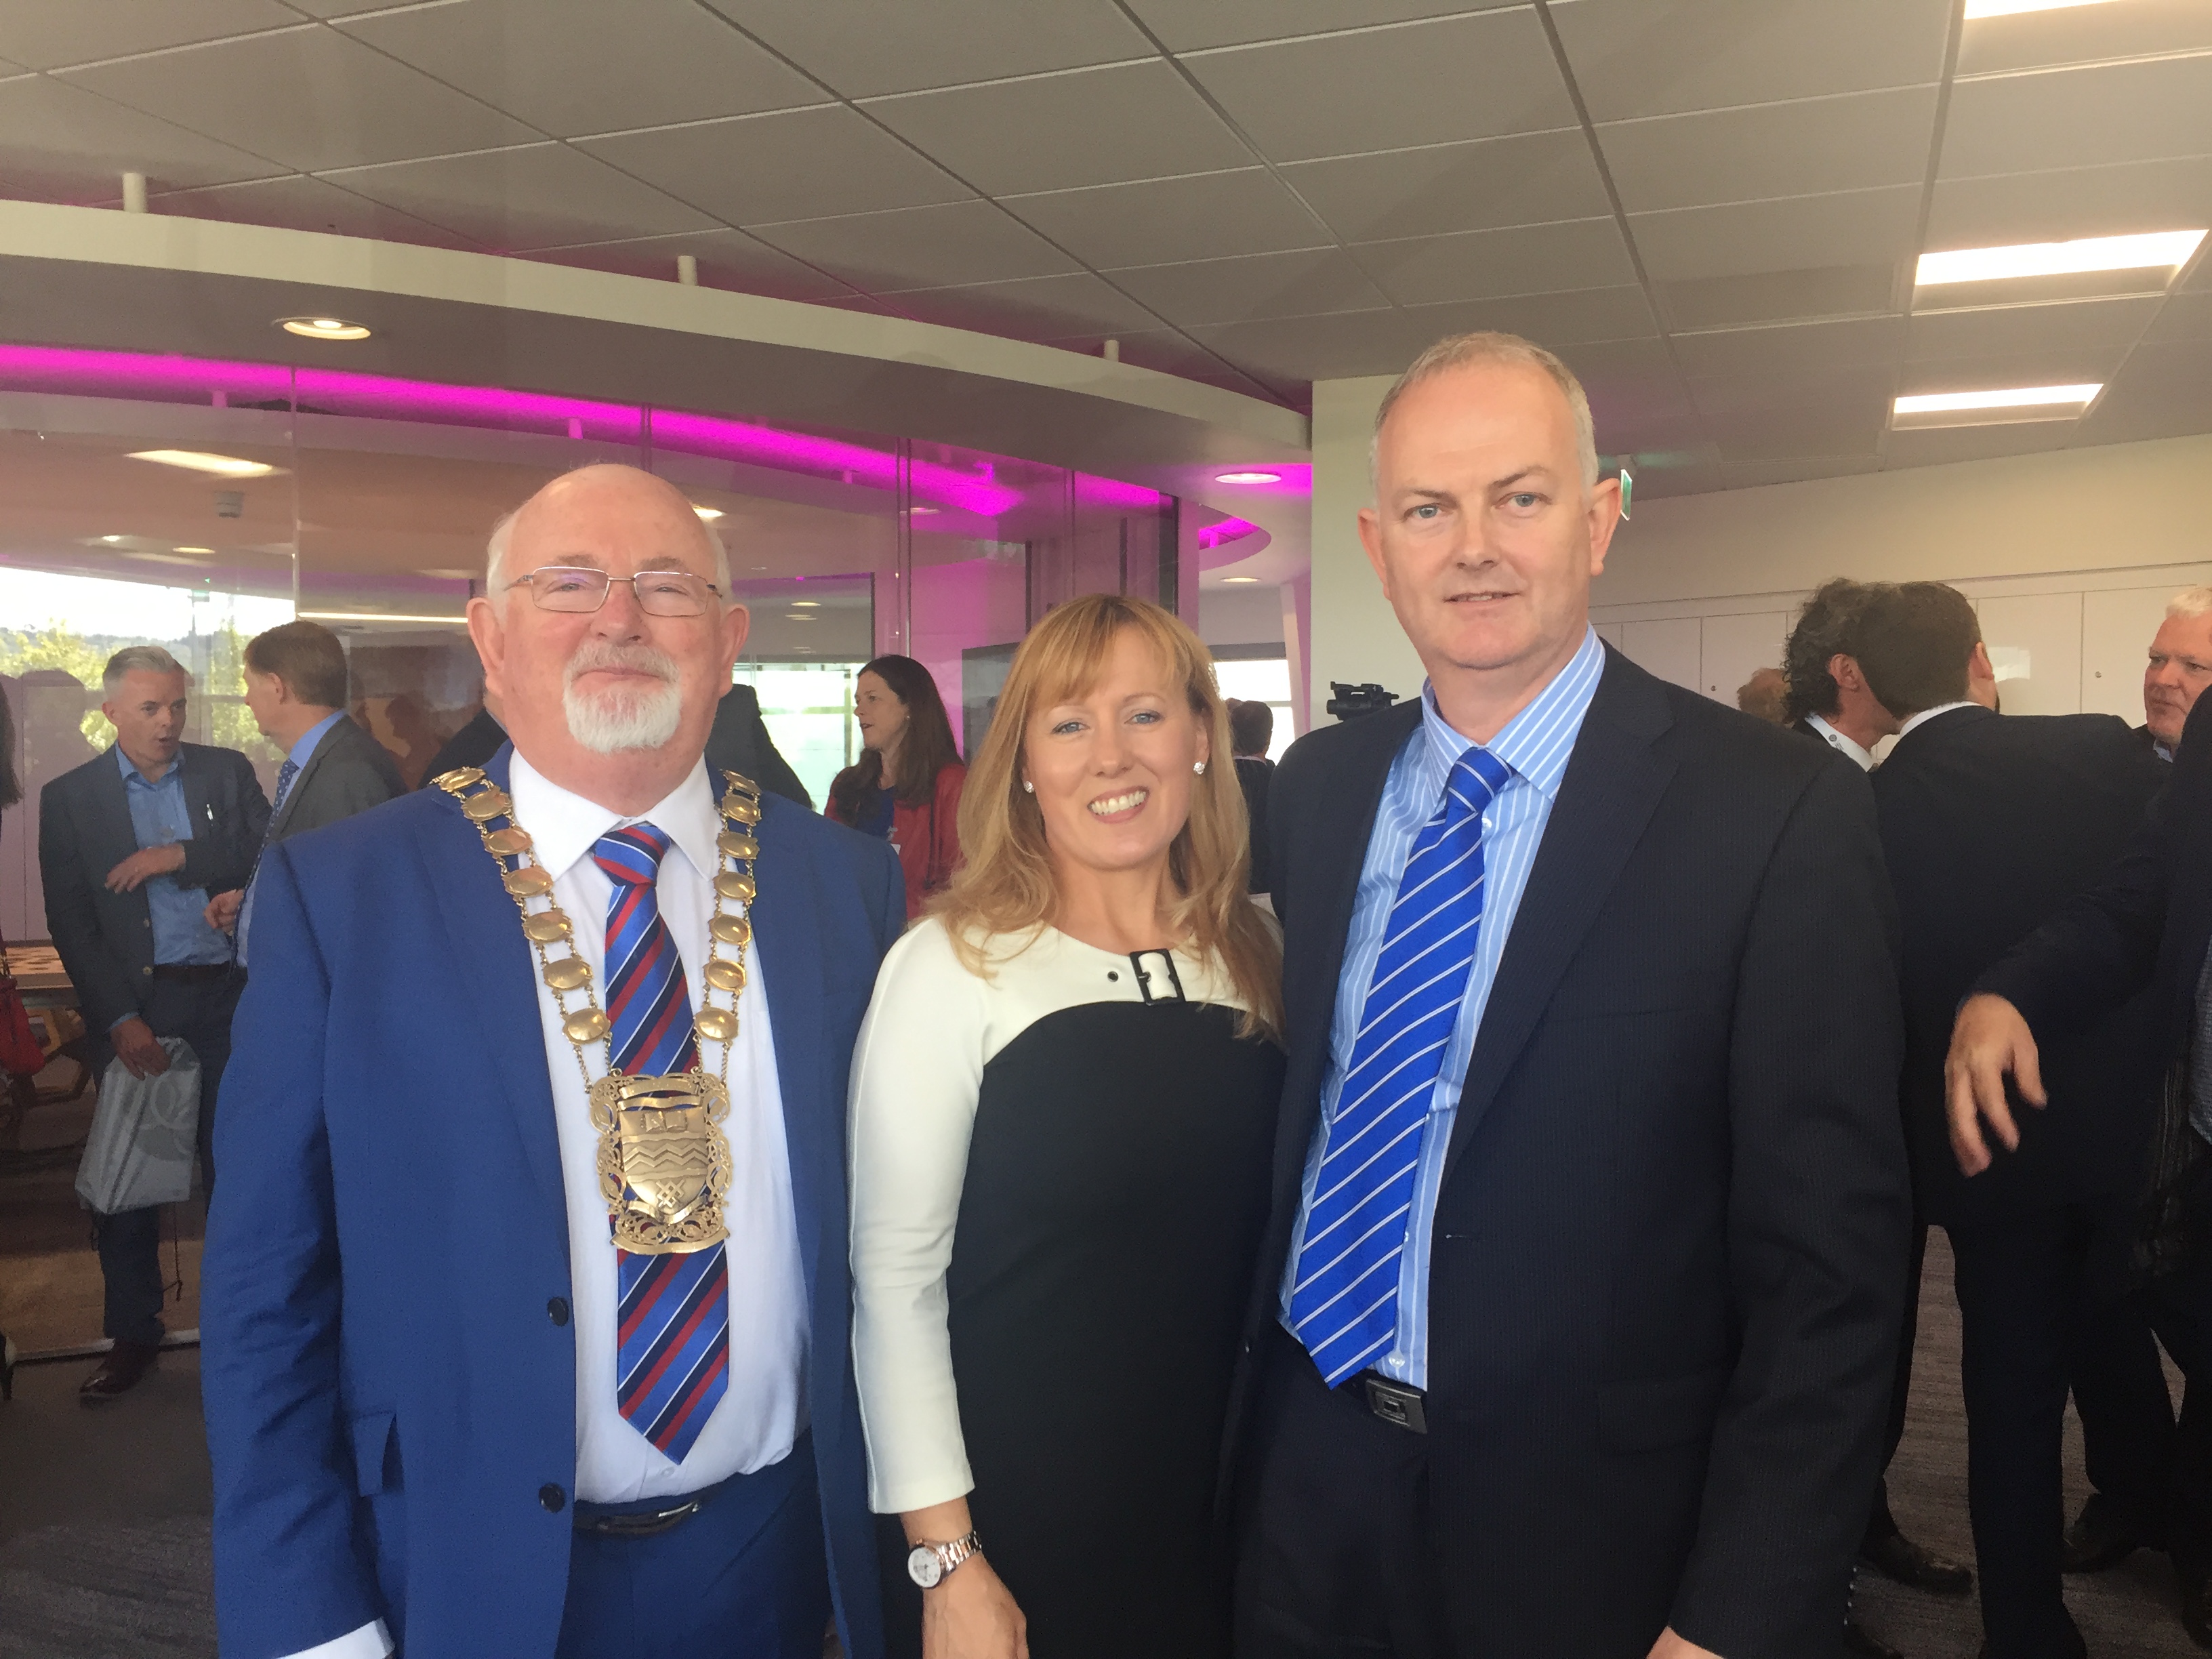 Cllr. Liona O'Toole with Mayor Guss O'Connell and Barry Kennedy CEO at the launch of company Irish Manufacturing Research